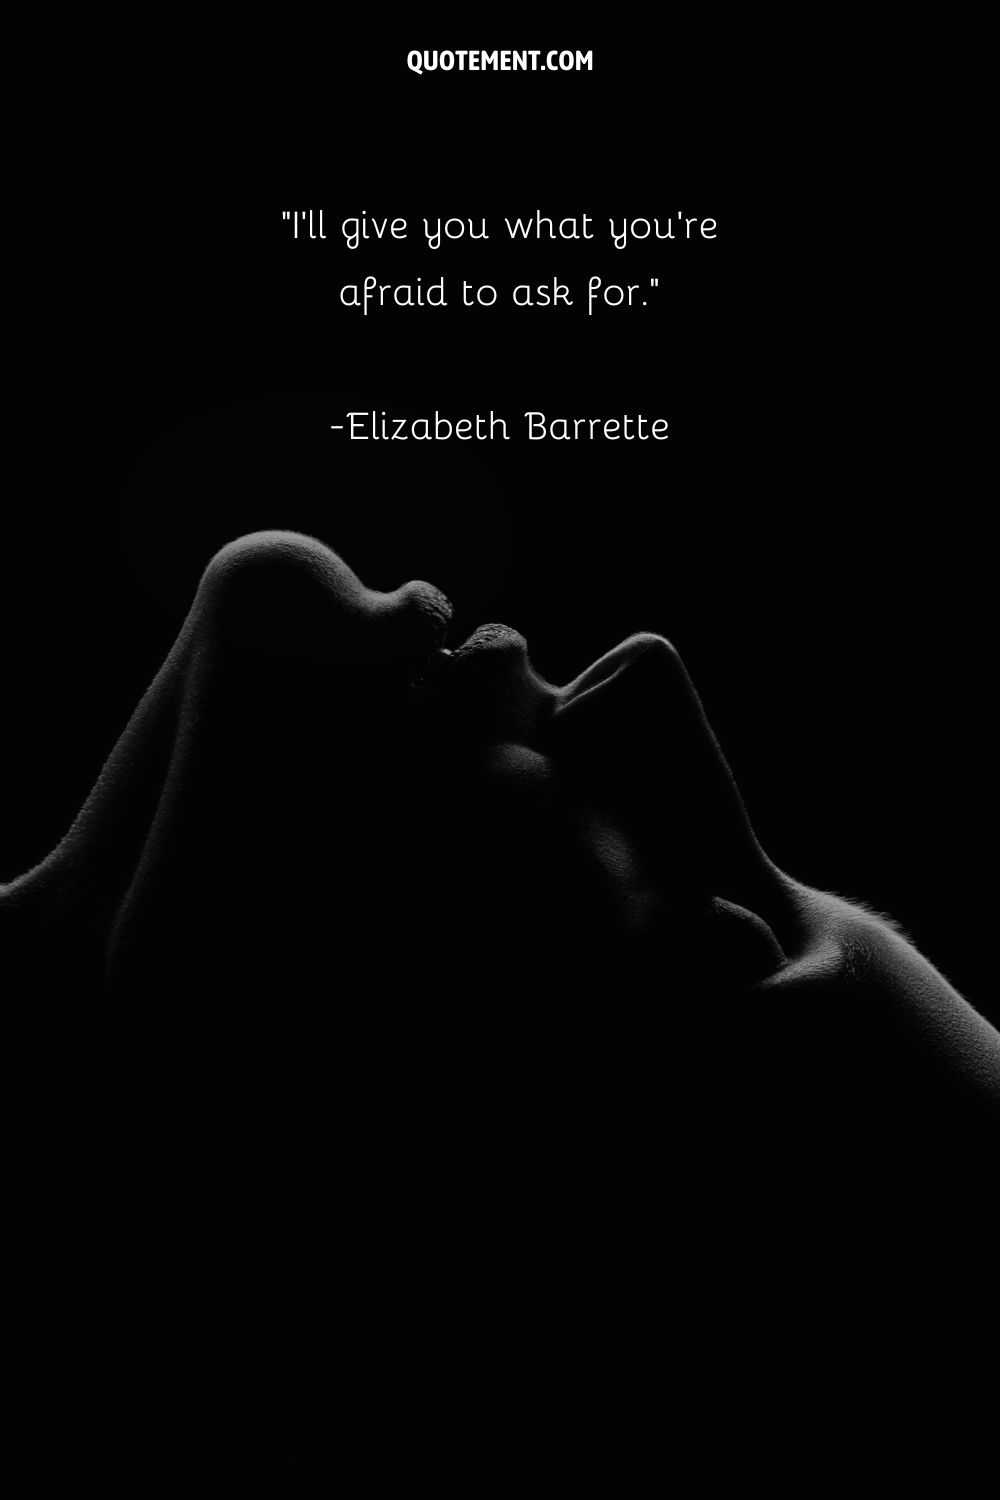 image of a person with closed eyes representing a quote about BDSM